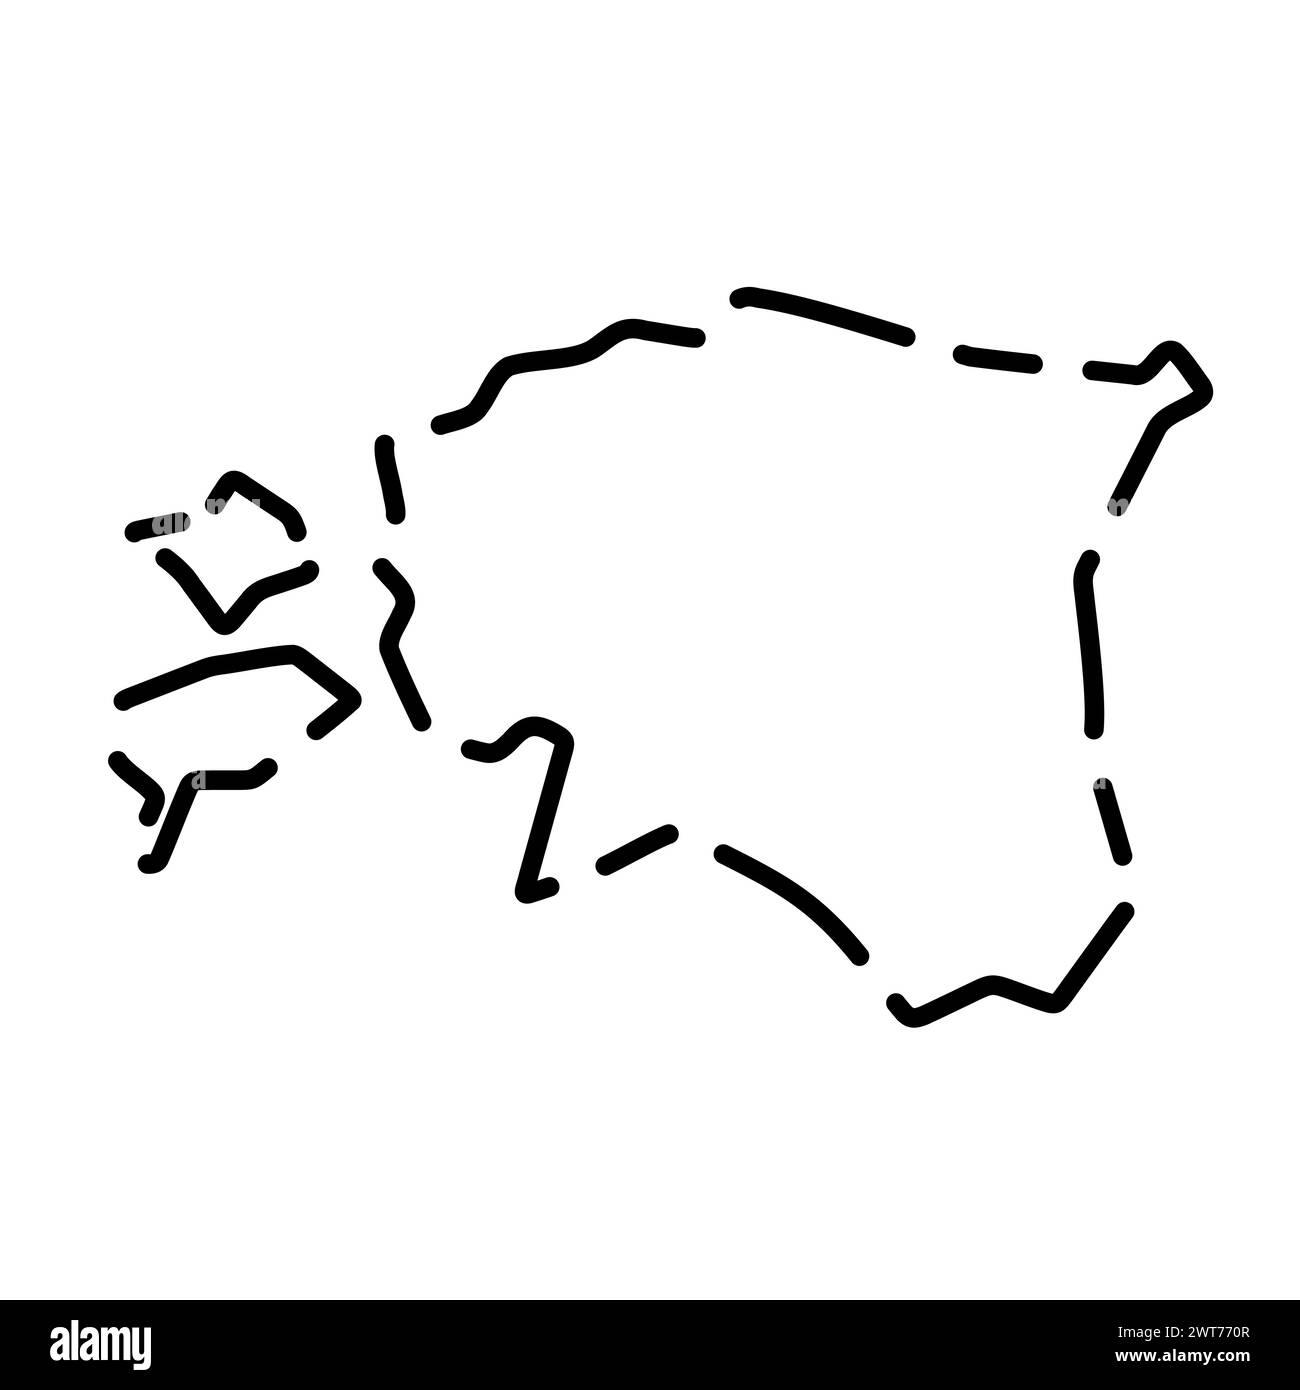 Estonia country simplified map. Black broken outline contour on white background. Simple vector icon Stock Vector